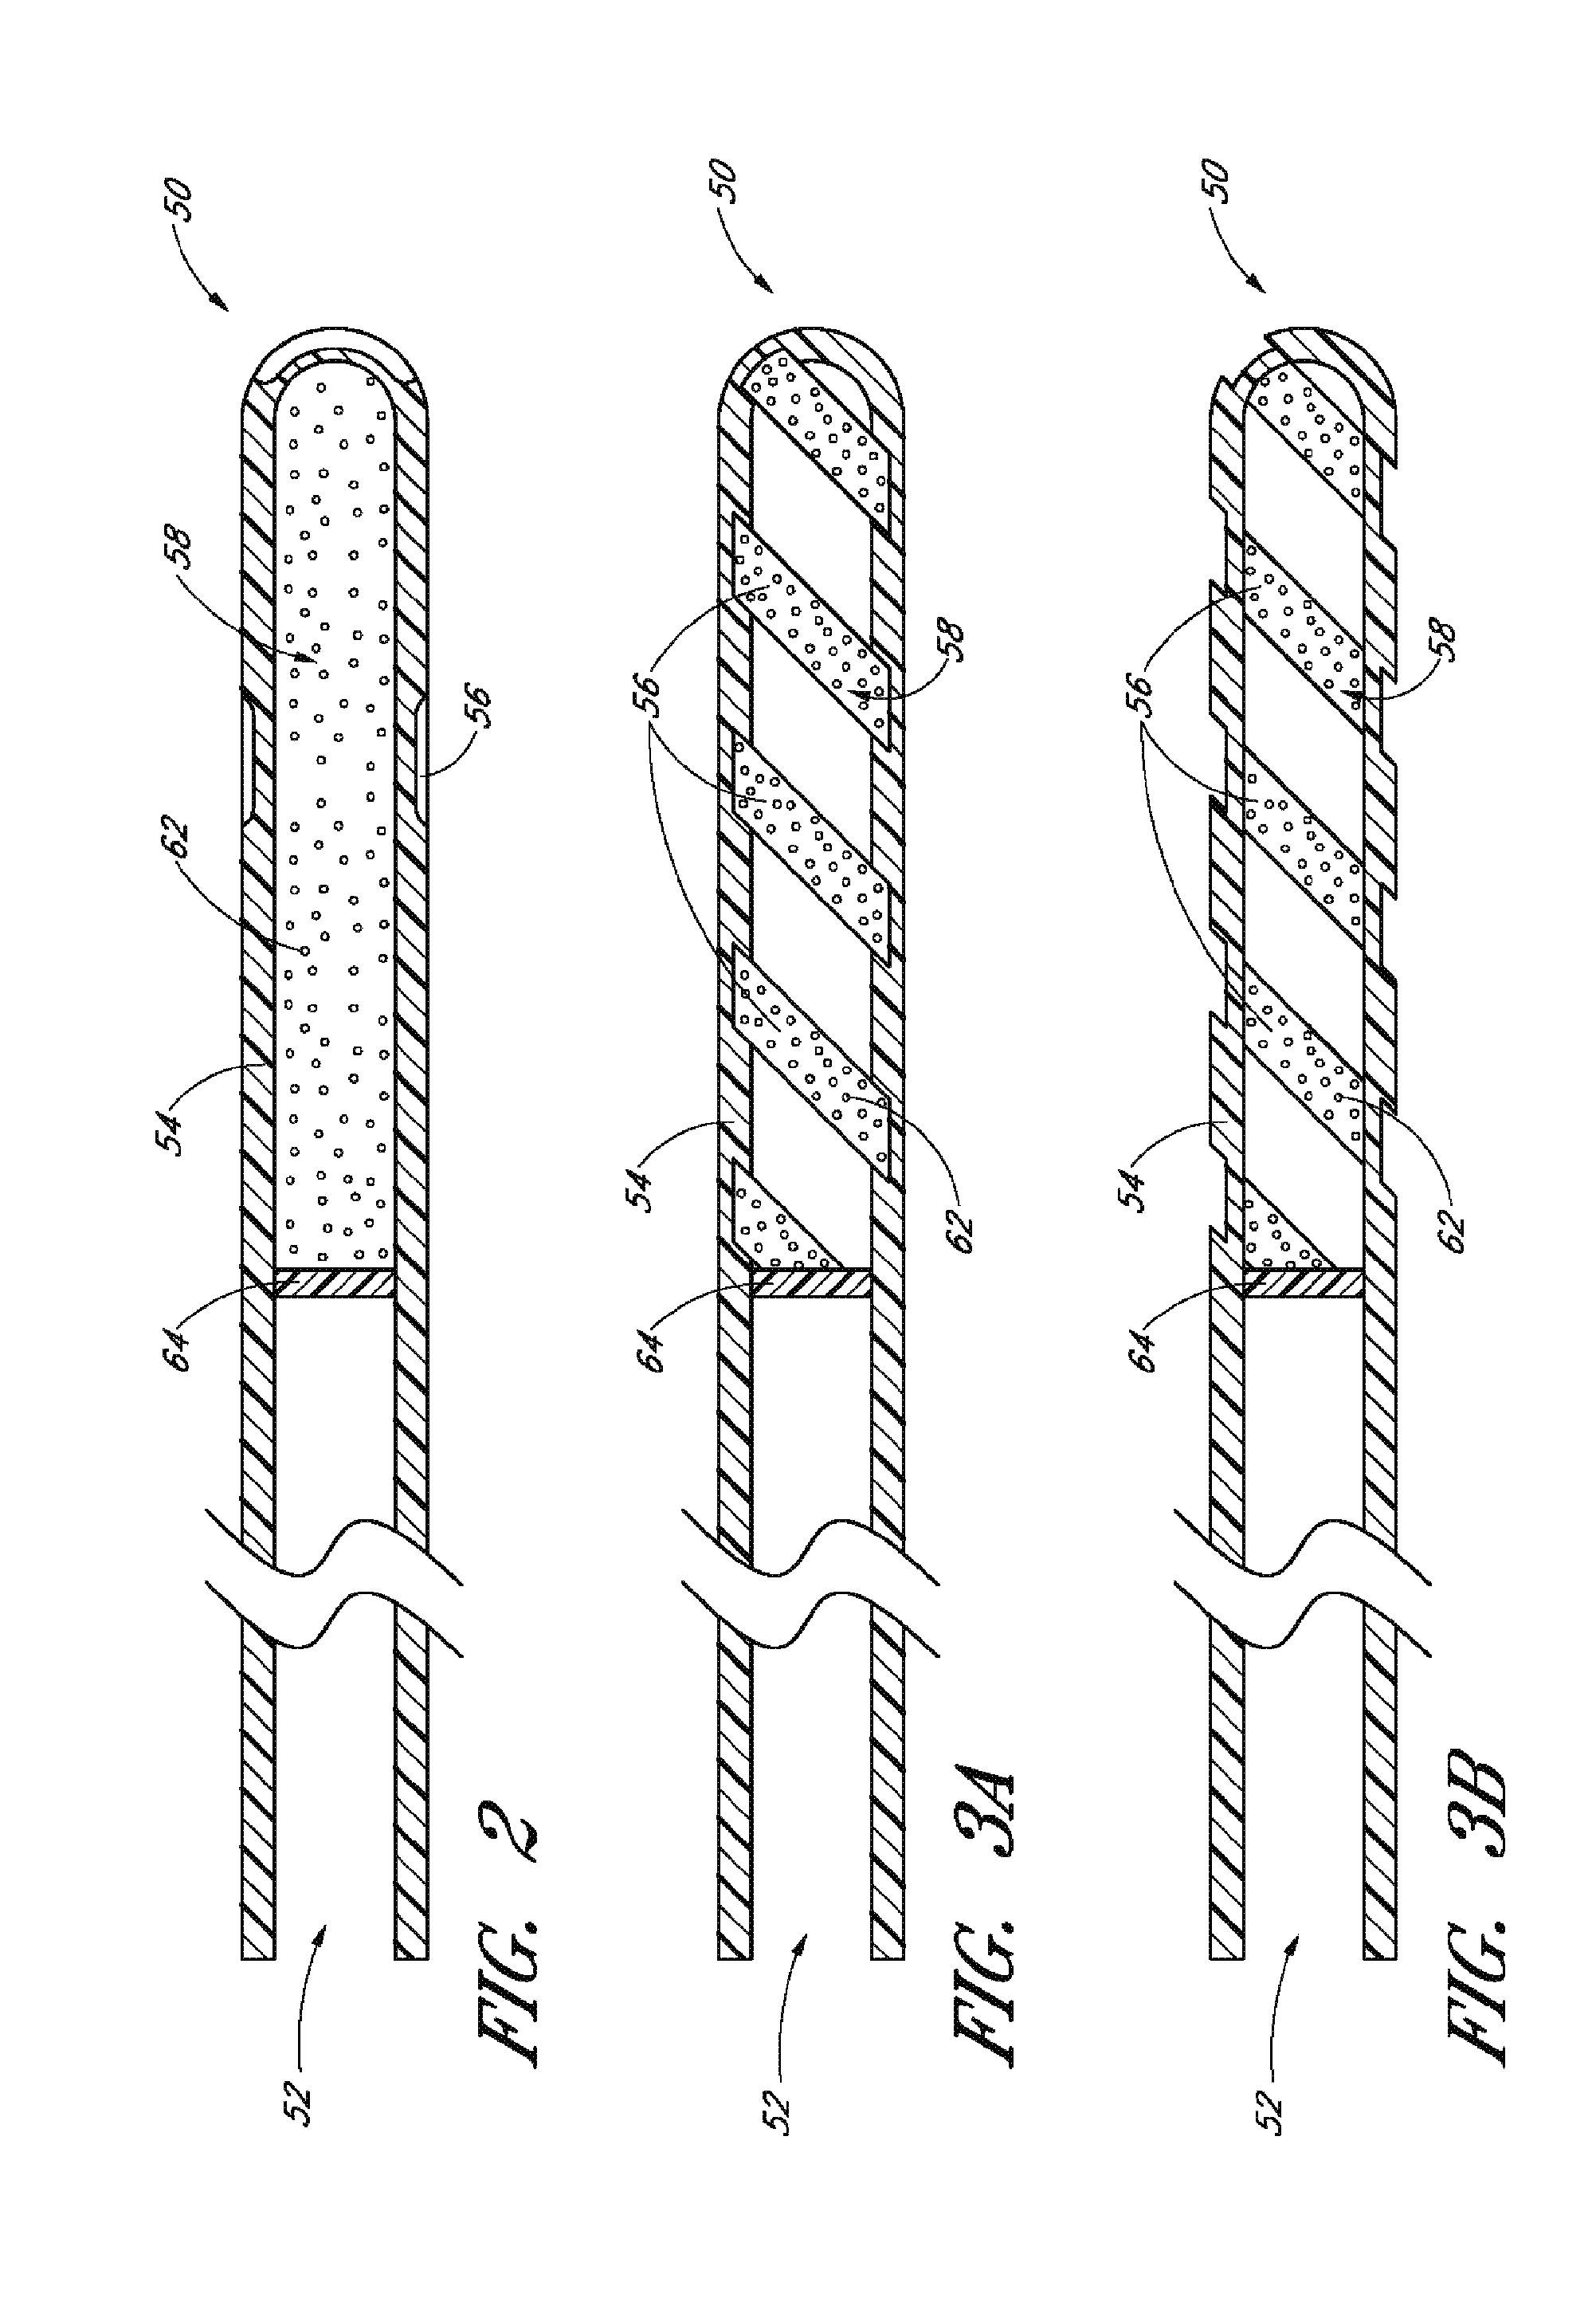 Implants with controlled drug delivery features and methods of using same